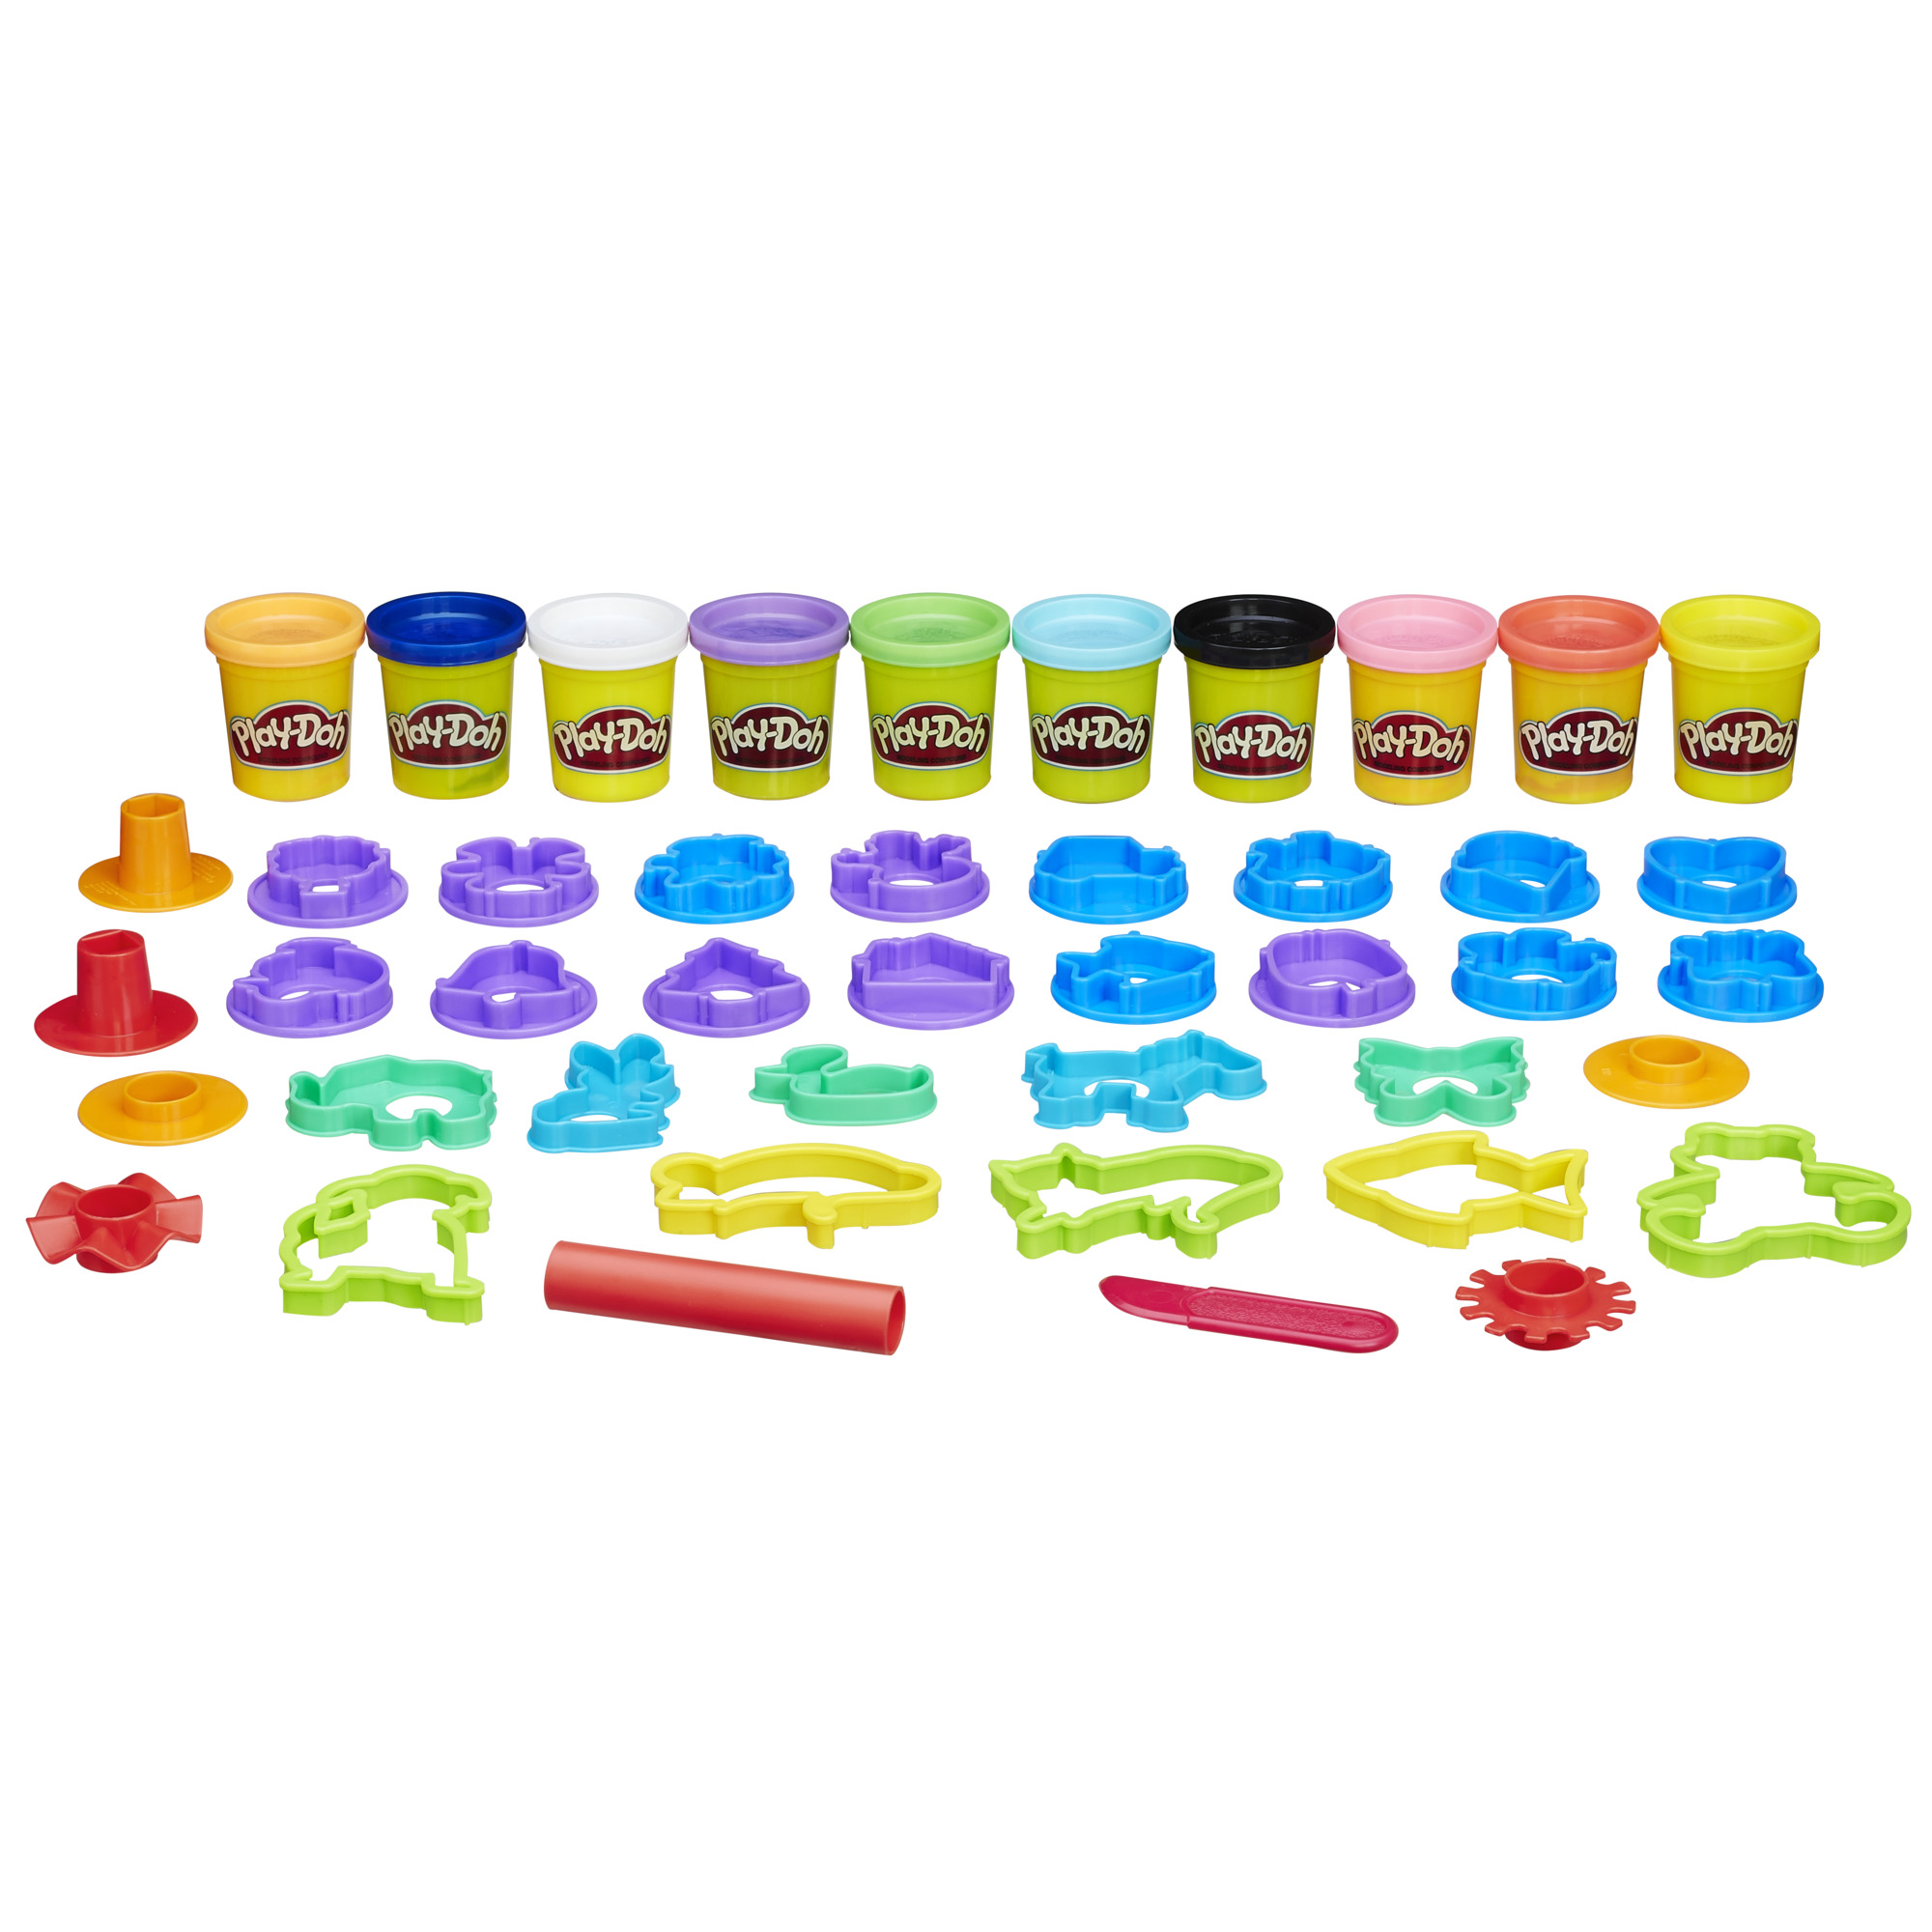 Play-Doh Modeling Compound Stamp ‘n Shape Play Dough Set - 10 Color (10 Piece), Only At Walmart - image 3 of 8